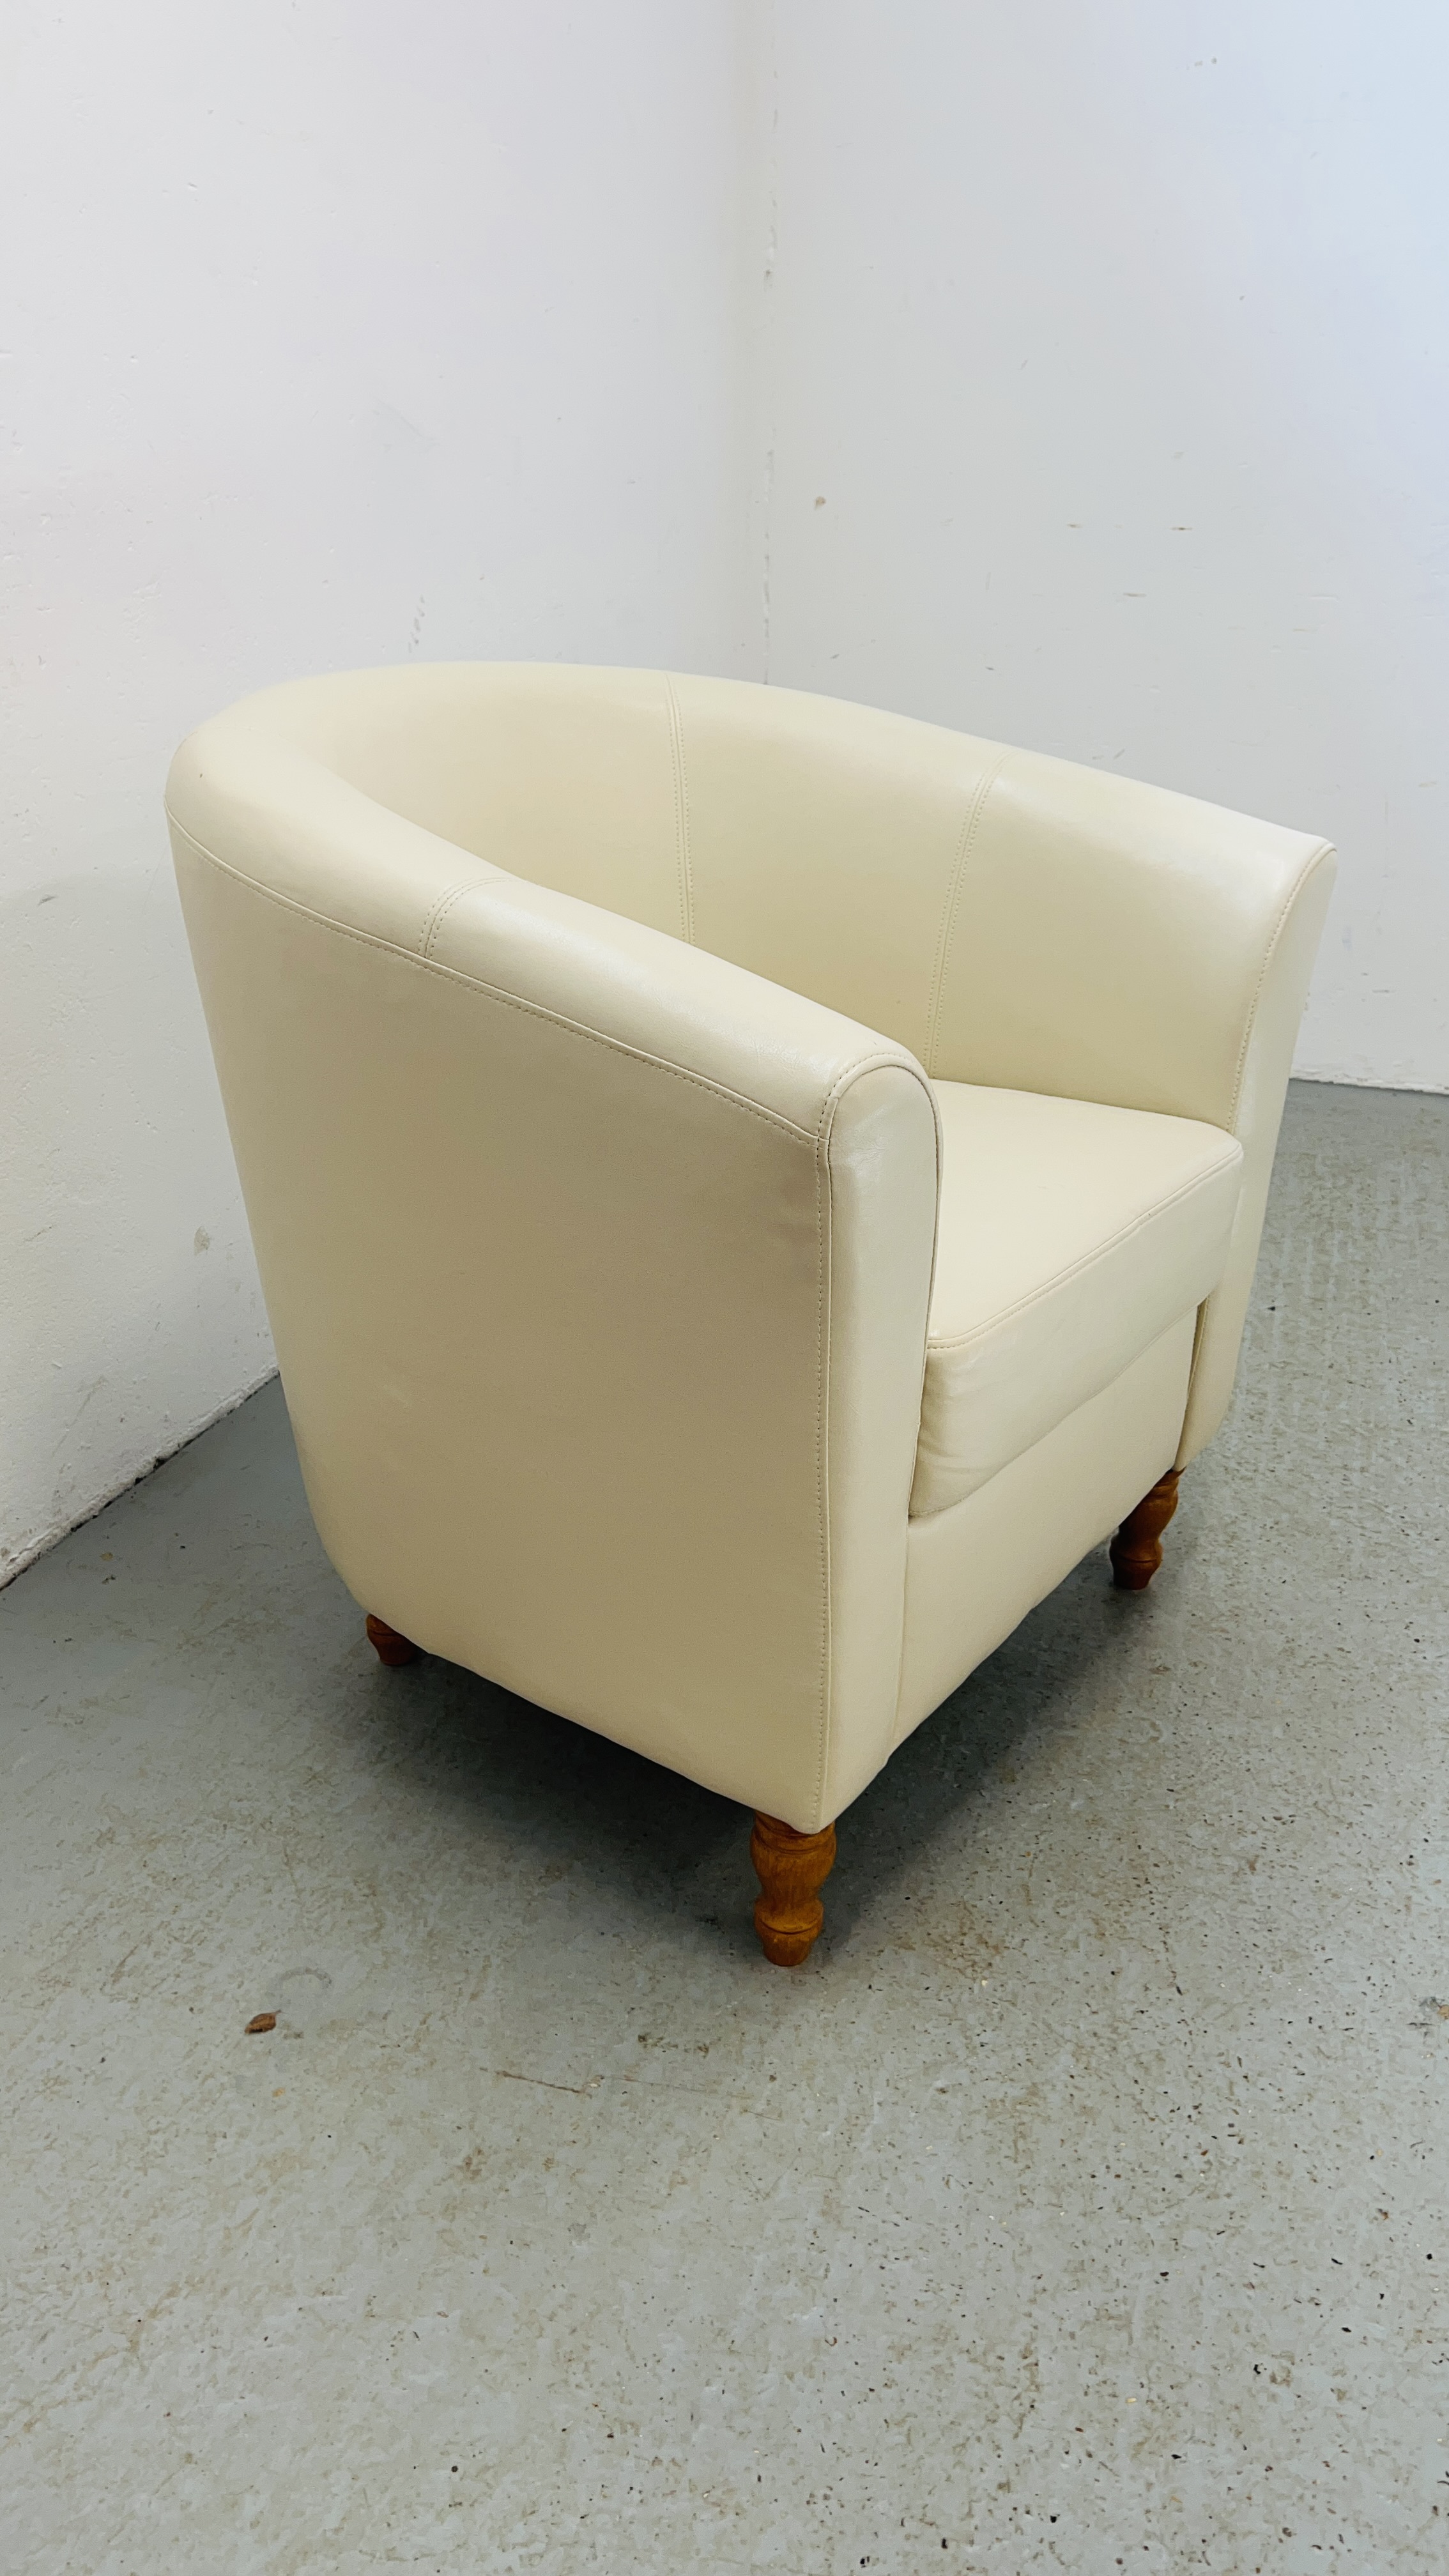 A MODERN CREAM FAUX LEATHER TUB CHAIR. - Image 5 of 5